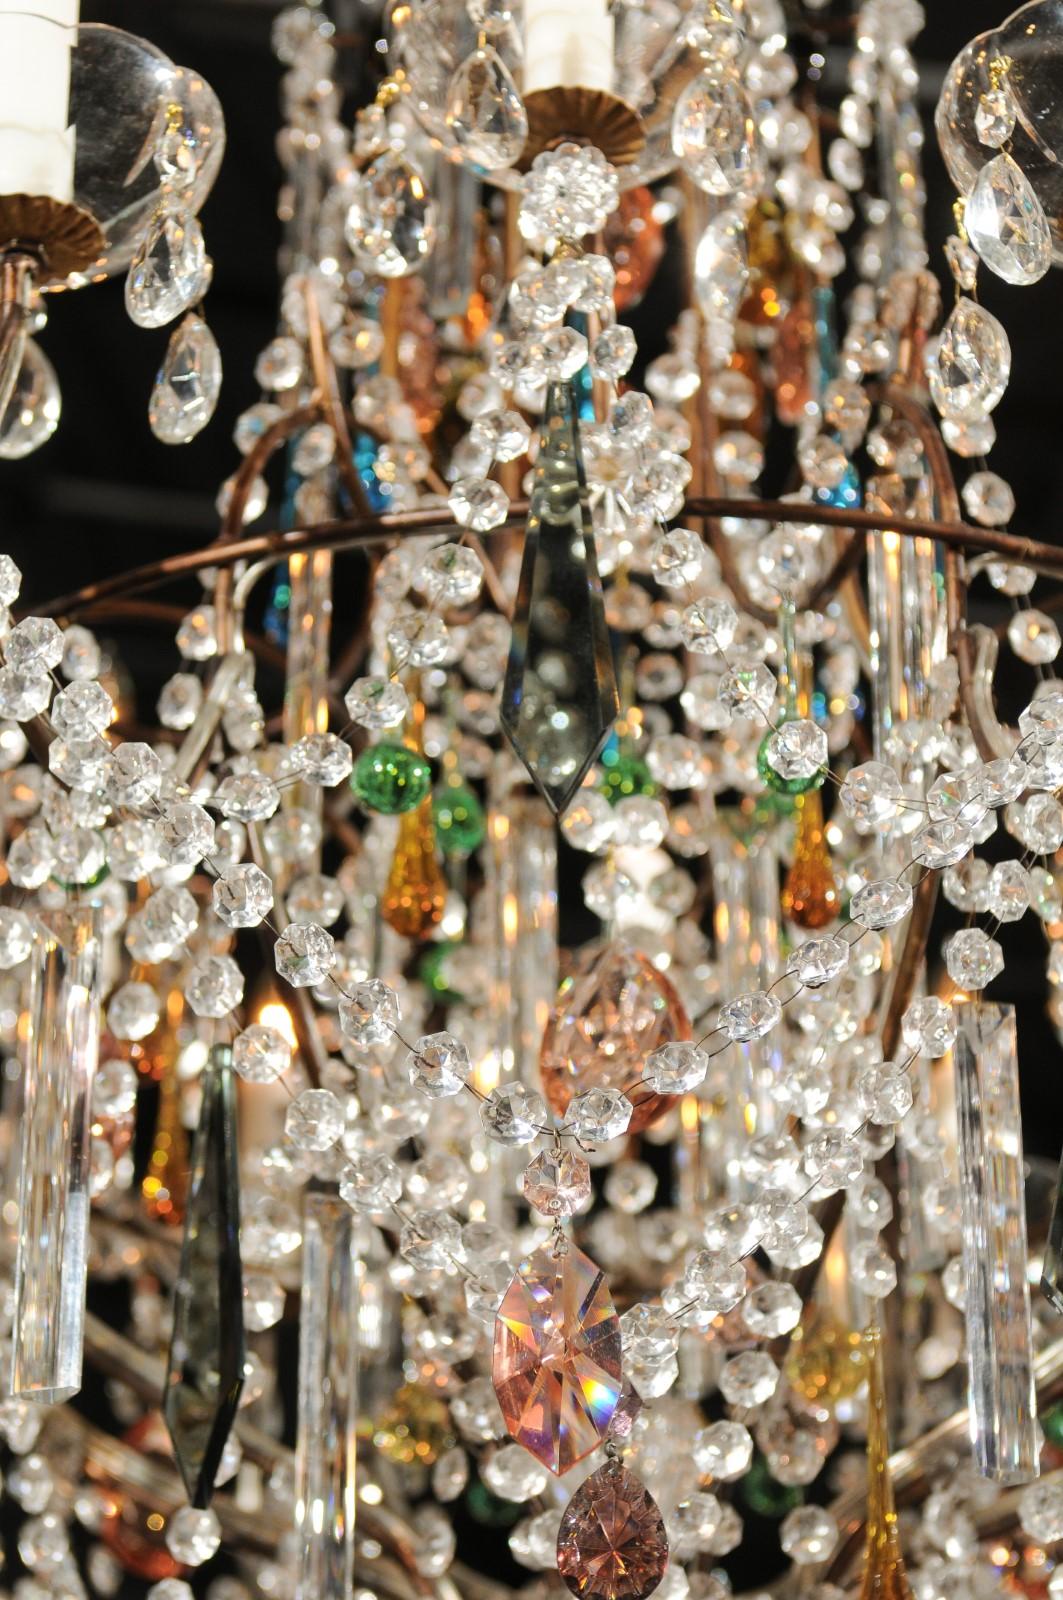 Italian Vintage Florentine Midcentury 16-Light Chandelier Draped with Colorful Crystals